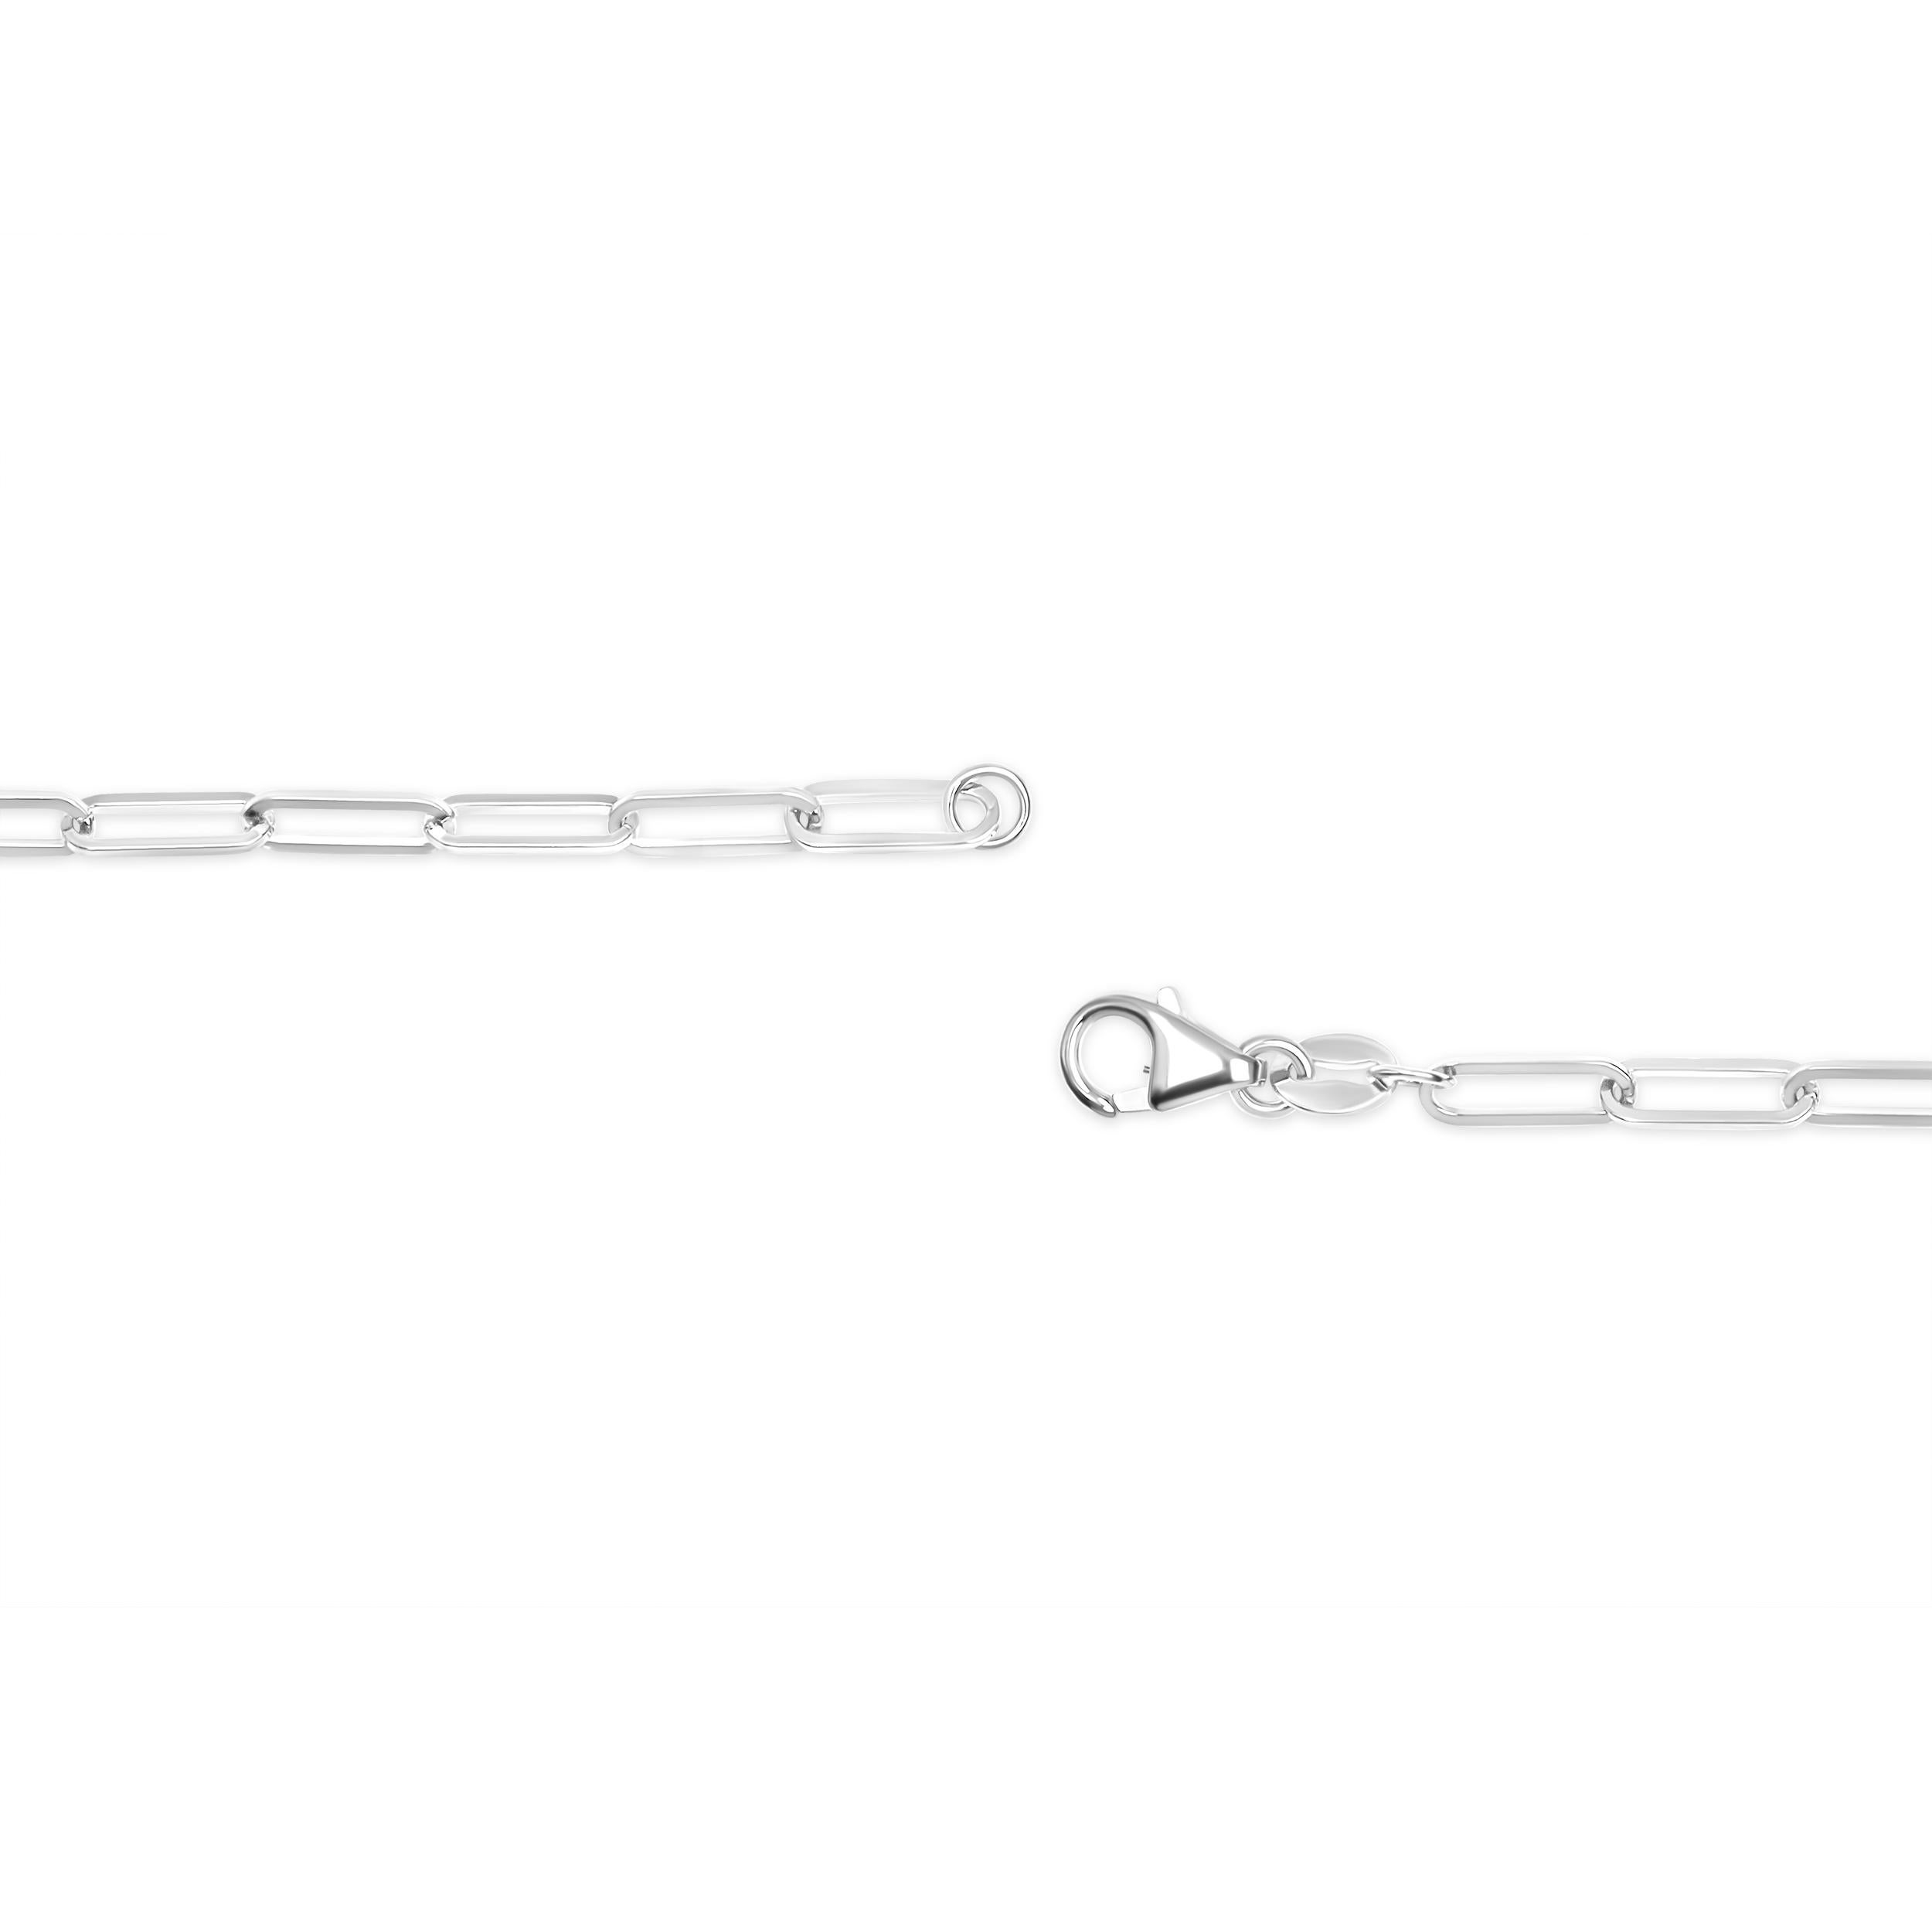 Introducing a timeless masterpiece, this exquisite 14K White Gold Paperclip Chain Necklace is a captivating blend of elegance and versatility. Crafted with meticulous attention to detail, this unisex chain features a 2.5mm width and a 18-inch